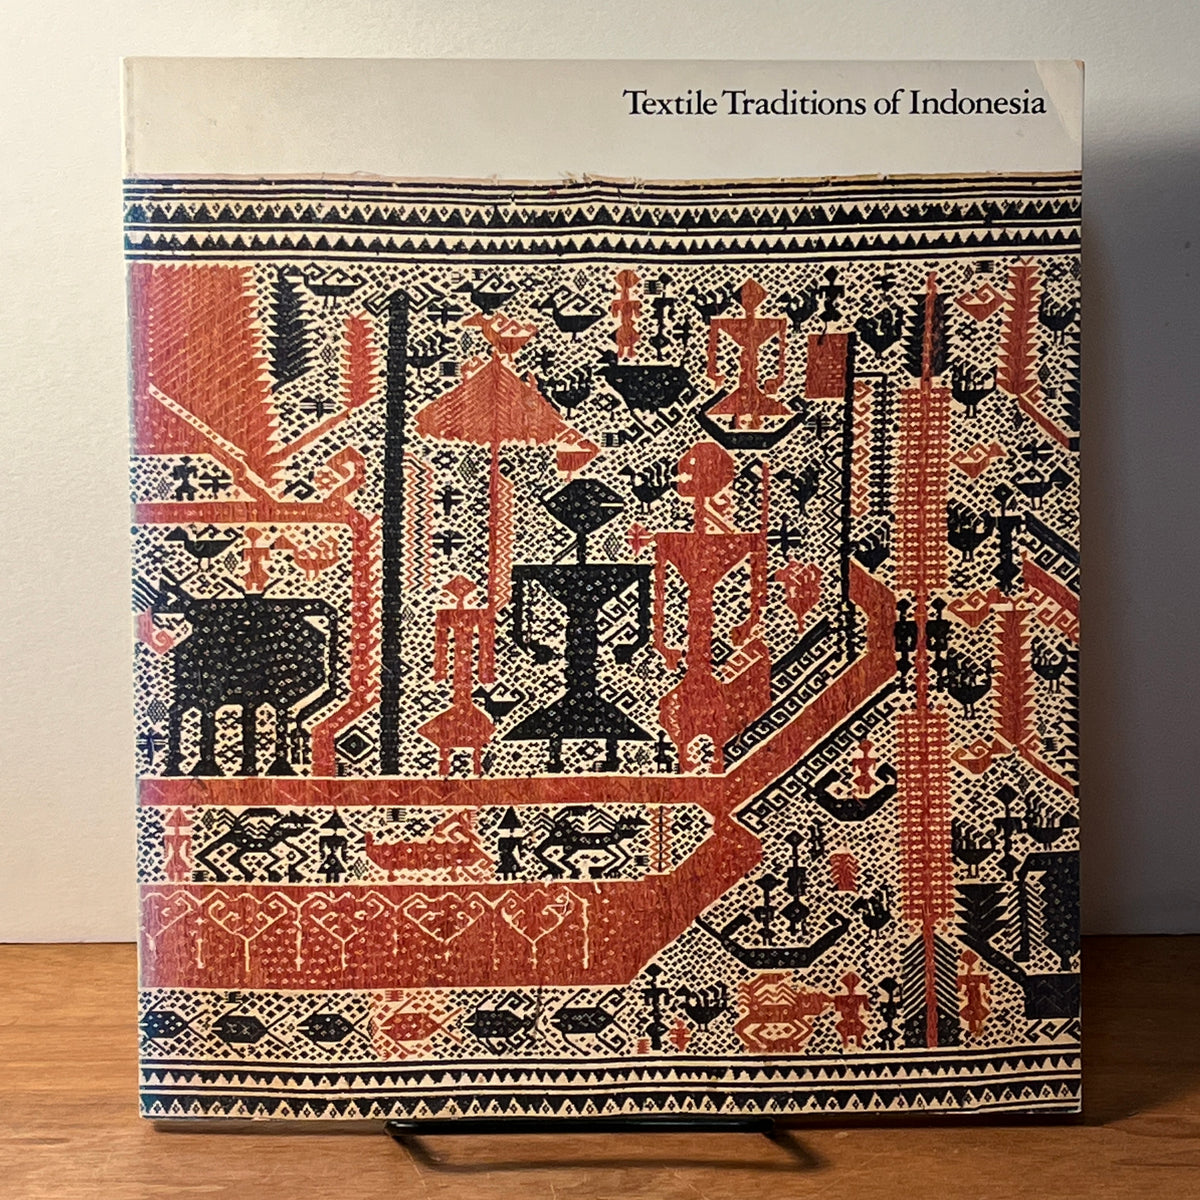 Textile Traditions of Indonesia, Mary Hunt Kahlenberg, Los Angeles, 1977